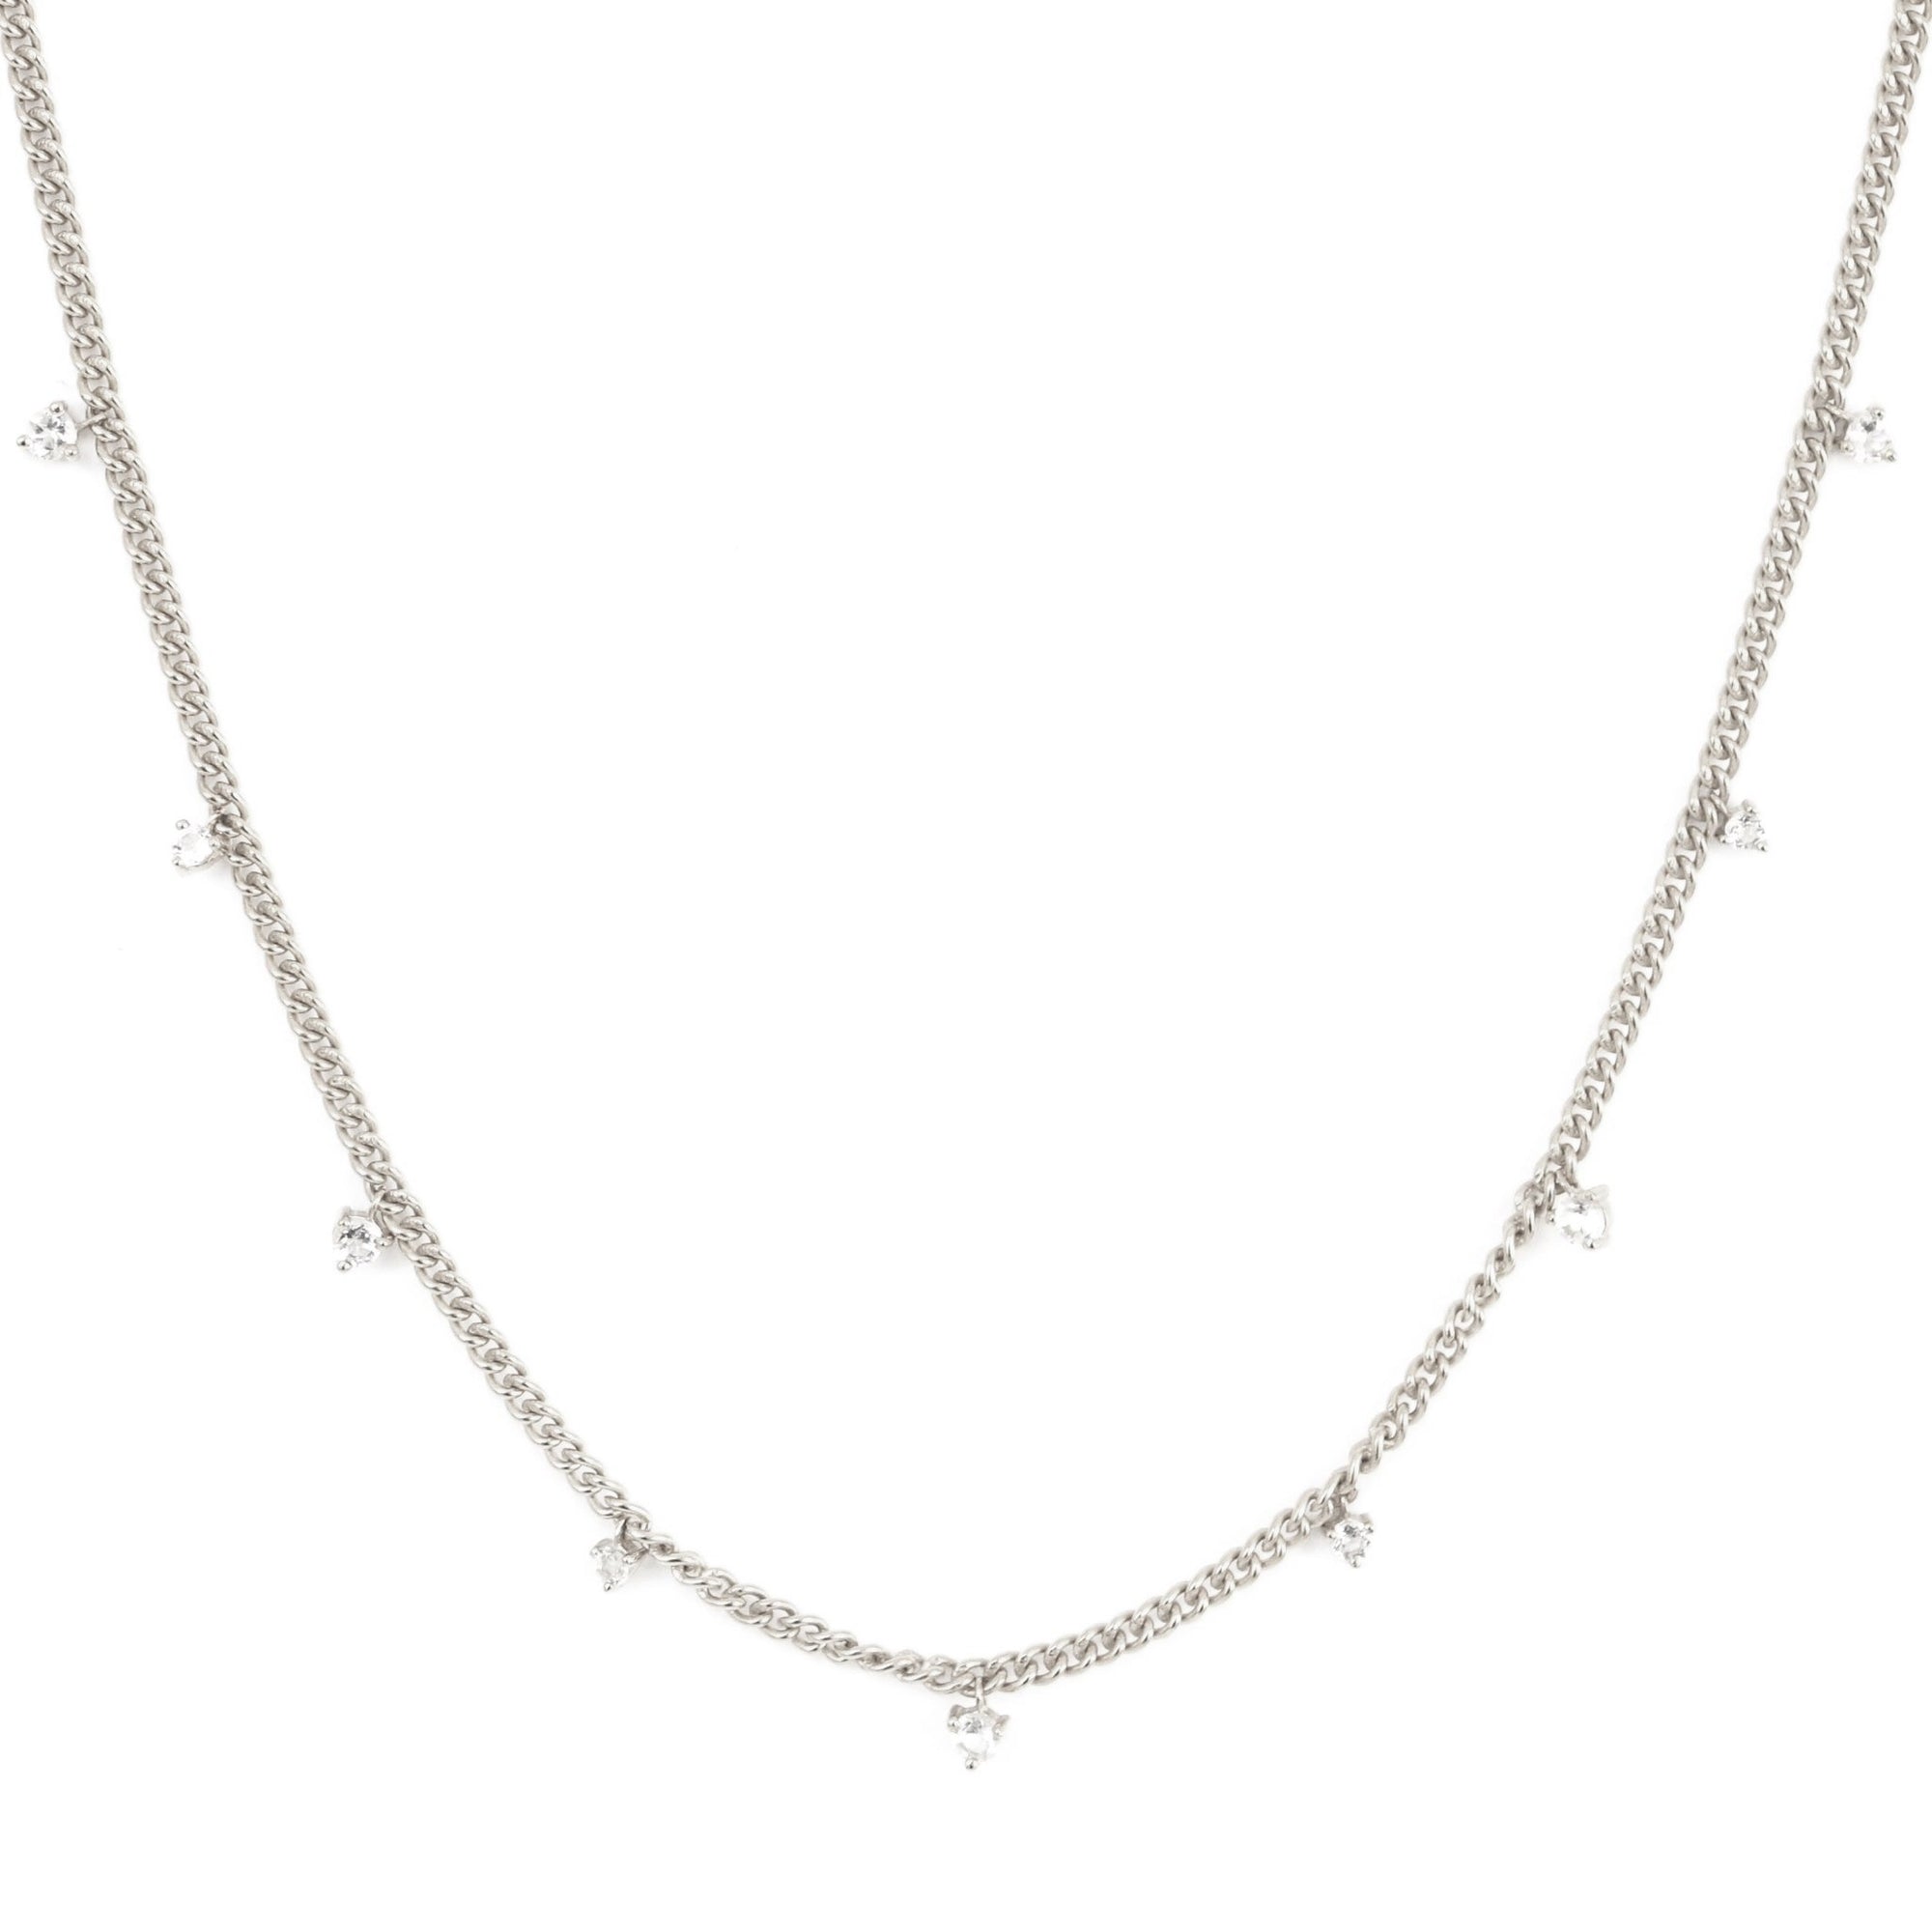 UNITY CROWN CURB LINK NECKLACE - WHITE TOPAZ & SILVER - SO PRETTY CARA COTTER